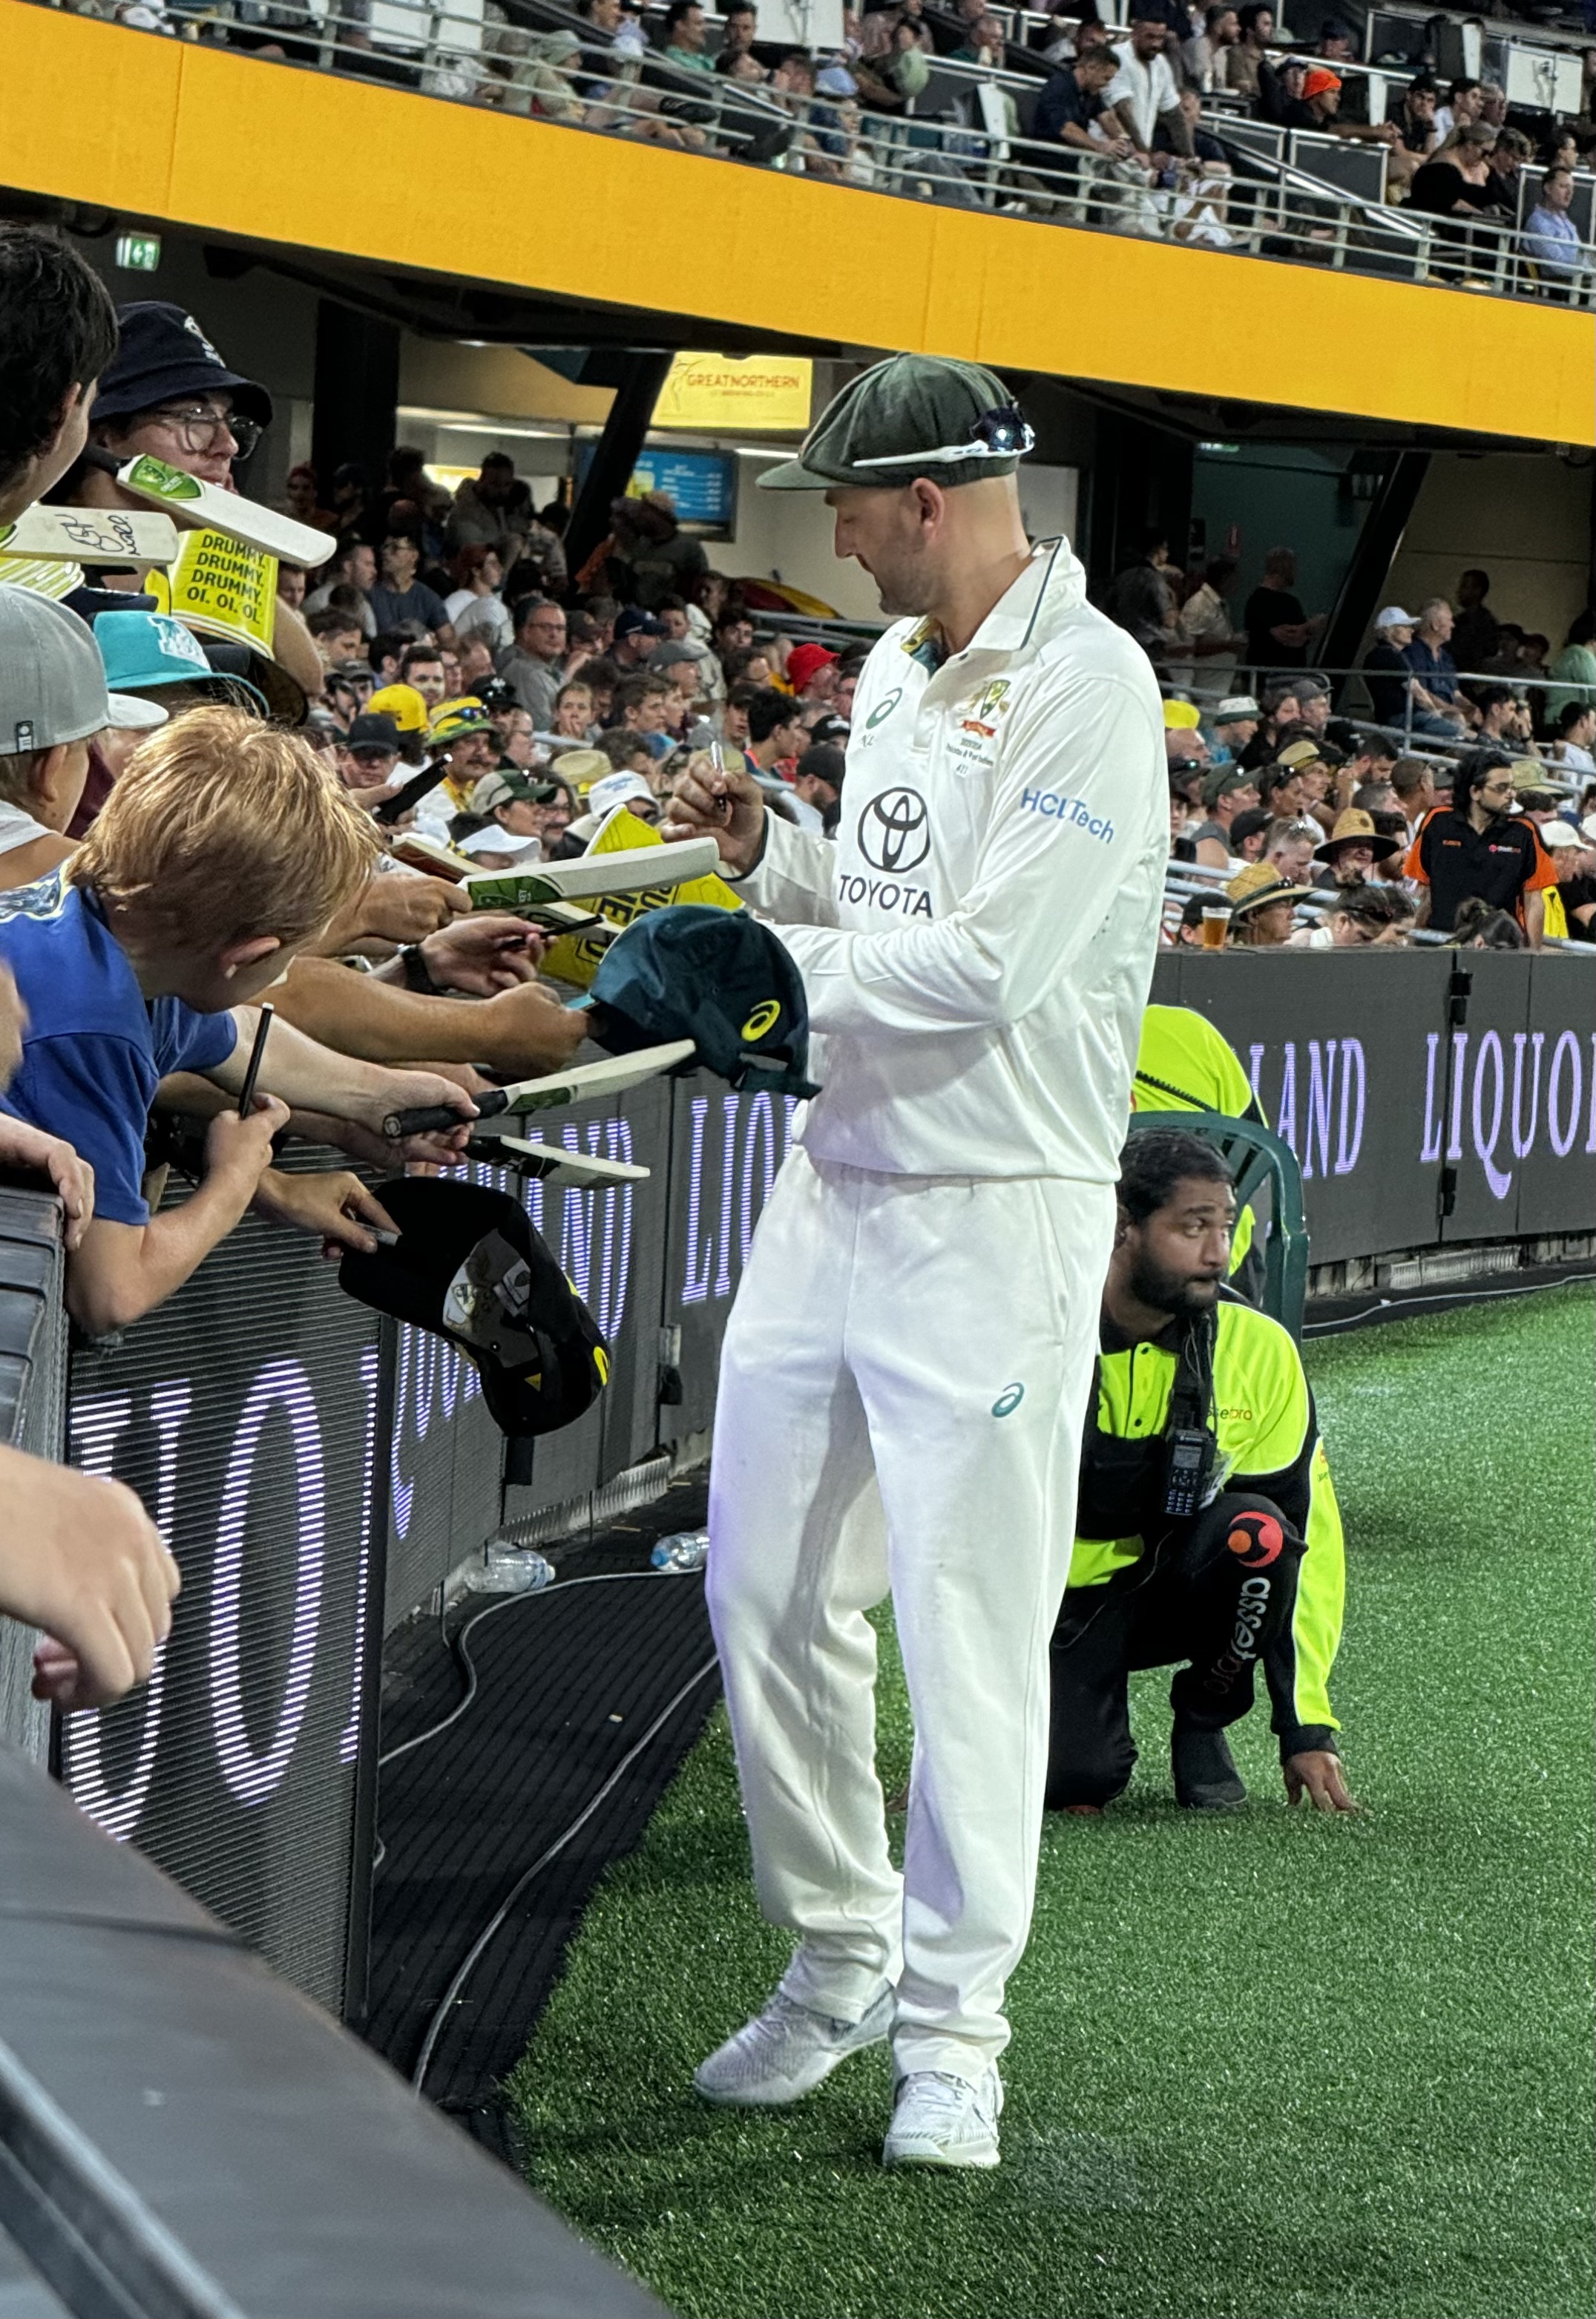 Nathan Lyon doing Autographs between deliveries